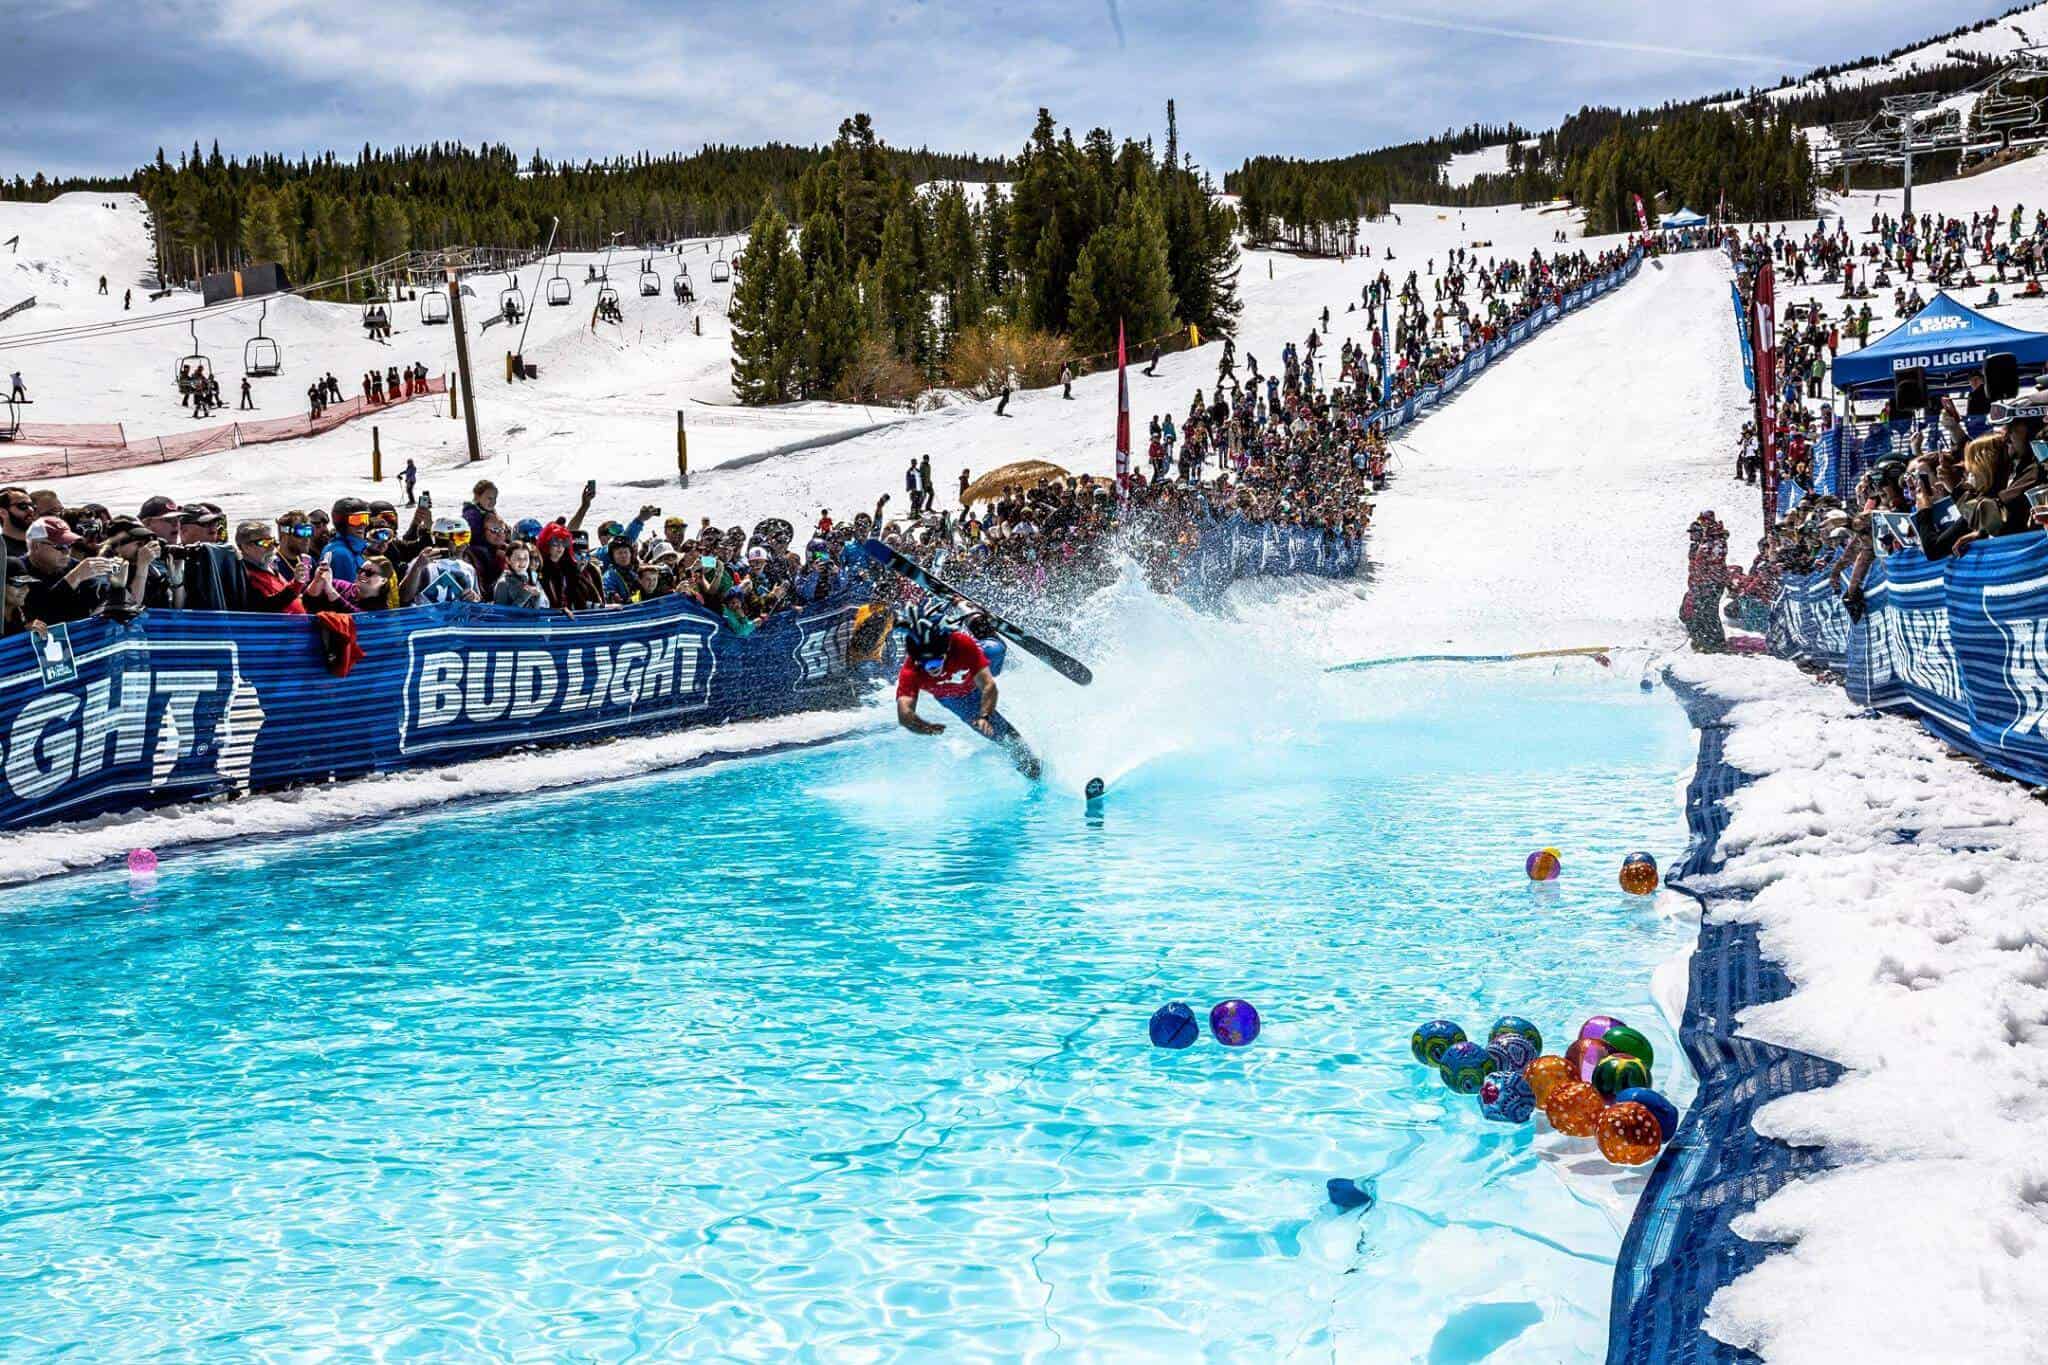 Skier attempts to ski over a pool of water with onlookers cheering them on